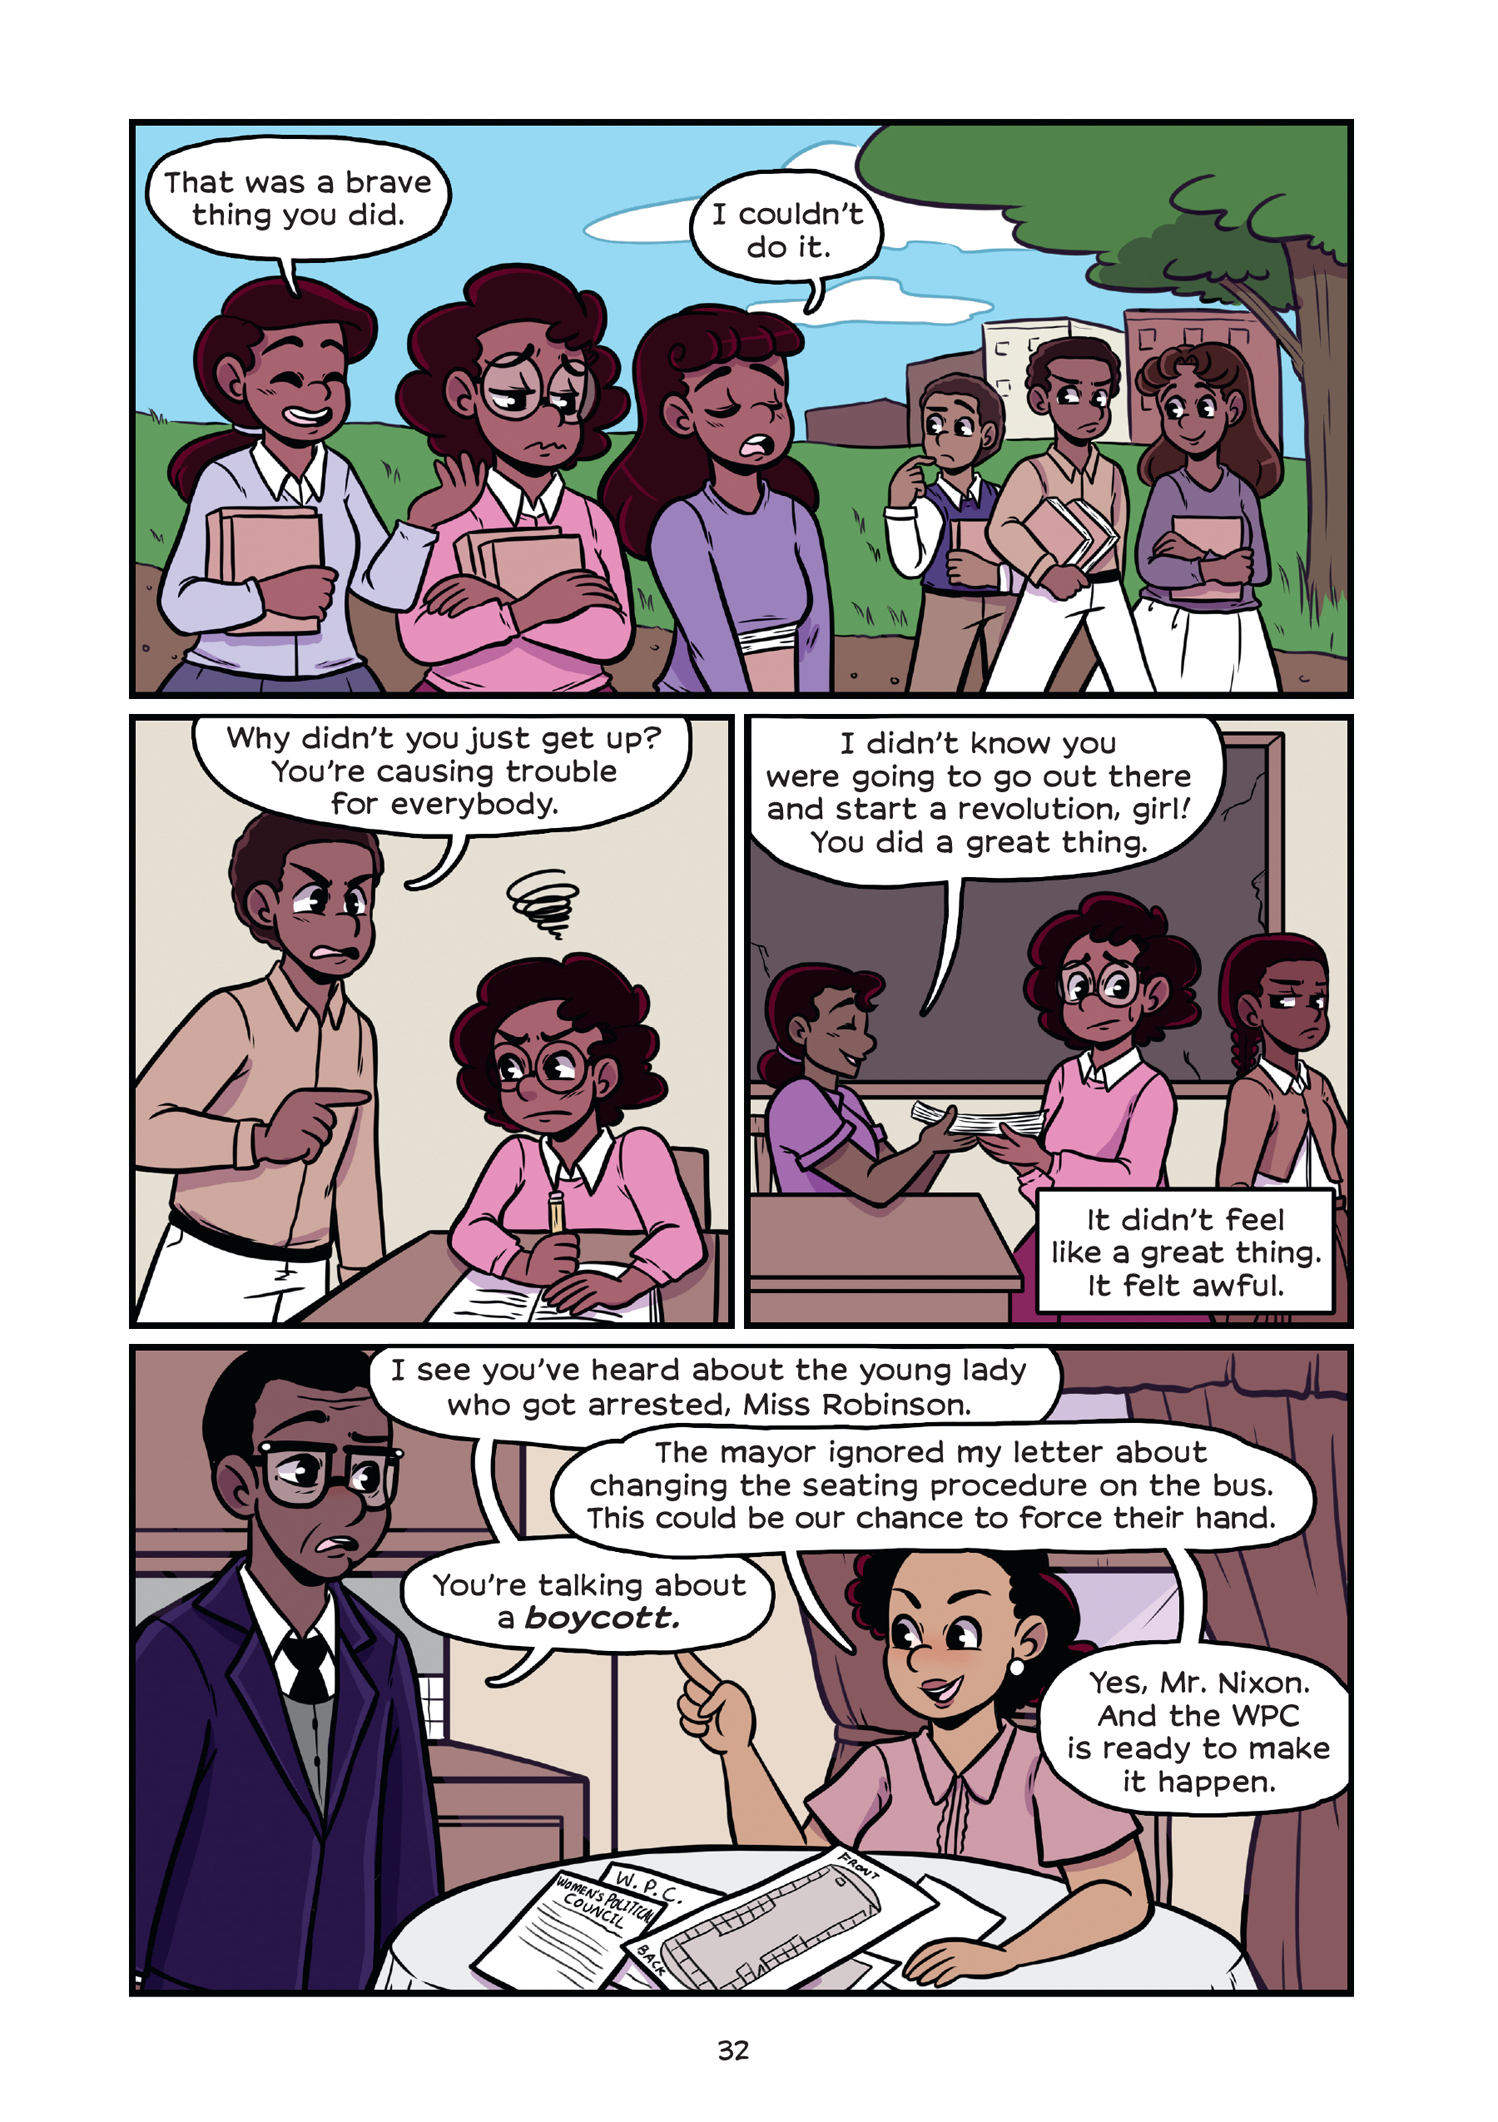 Read online History Comics comic -  Issue # Rosa Parks & Claudette Colvin - Civil Rights Heroes - 37